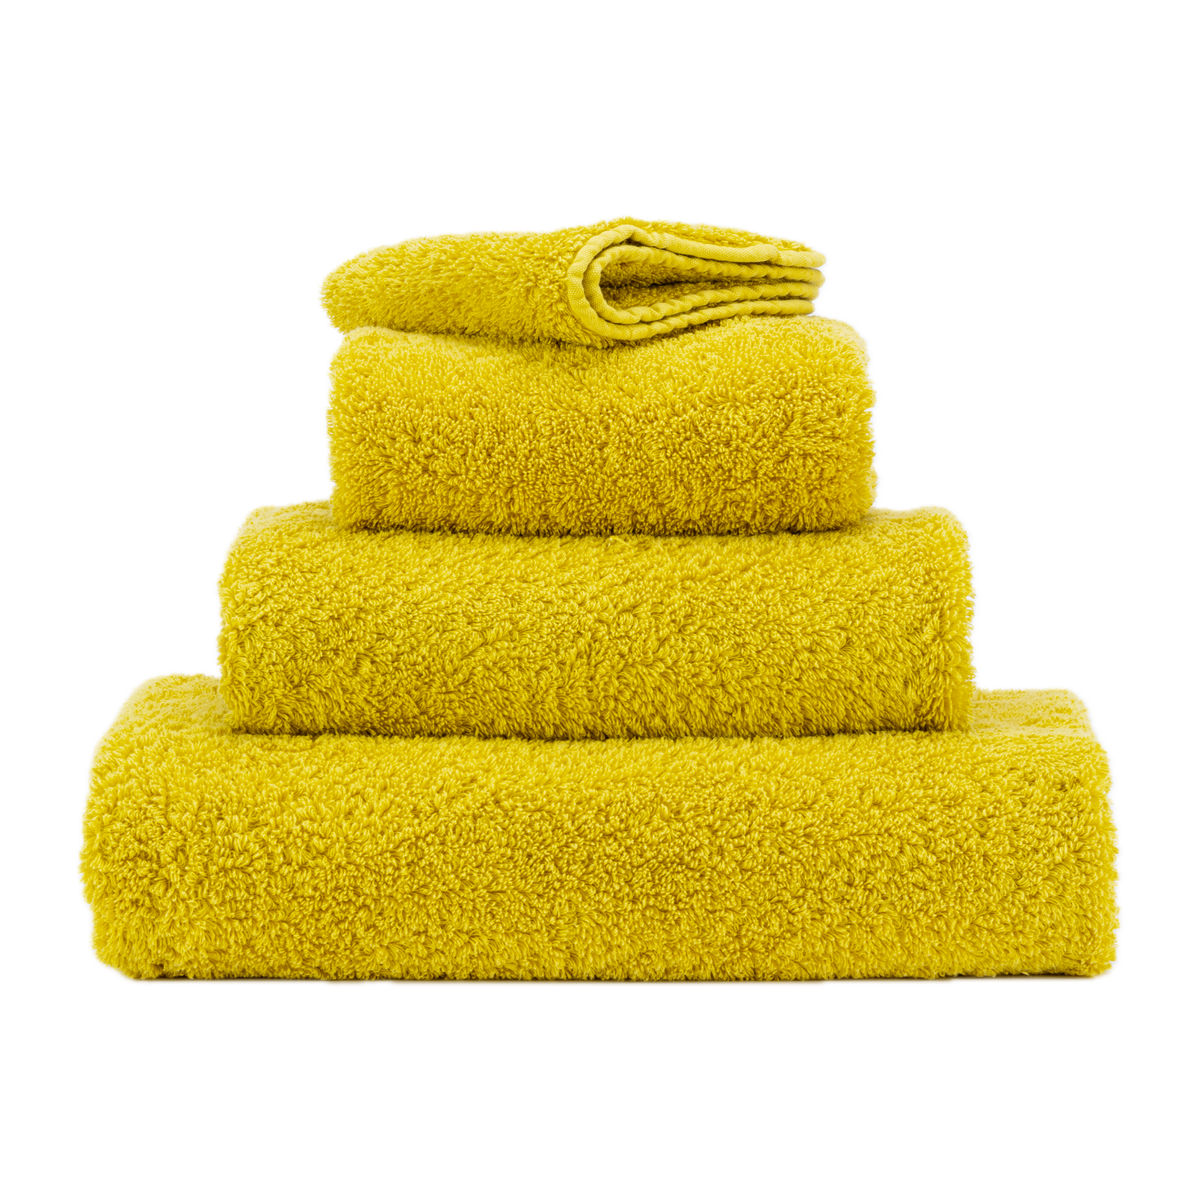 Stack of Abyss Super Pile Bath Towels in Yuzu Color